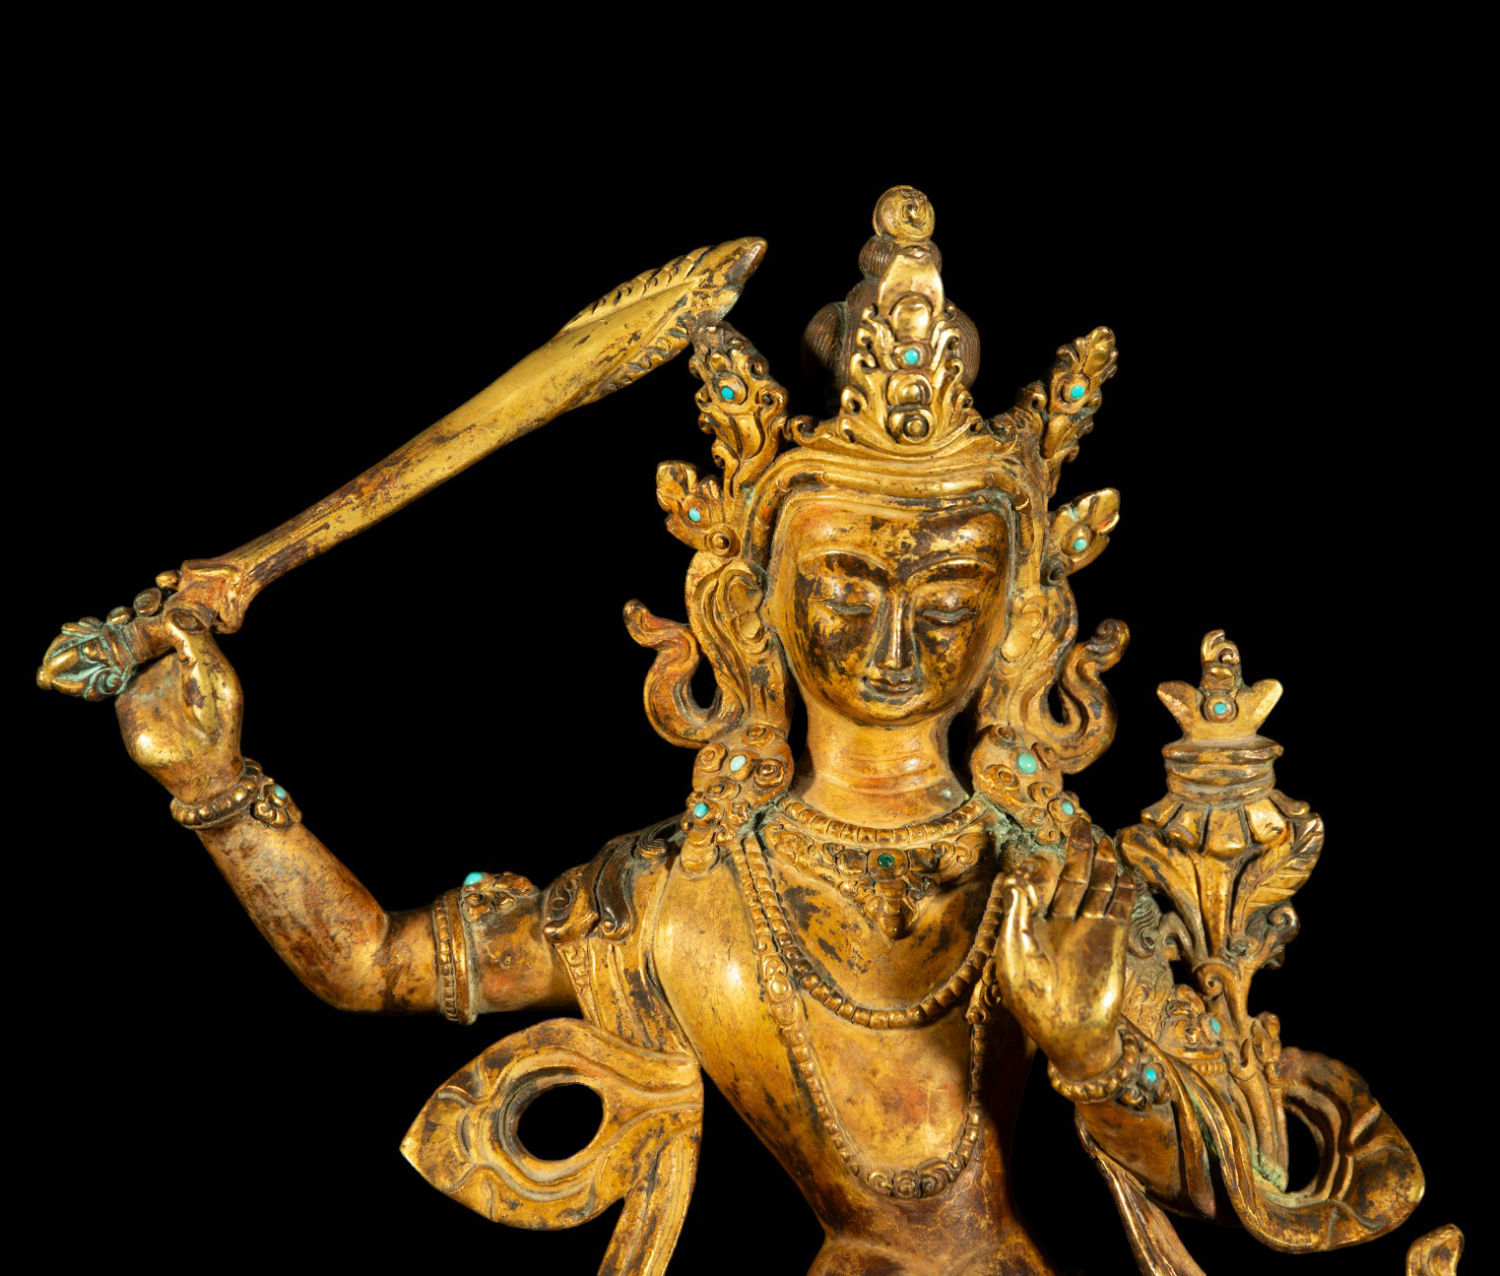 Exquisite Goddess Tara in gilt repoussé copper, Chinese school, Tibet, 19th century - Image 2 of 8